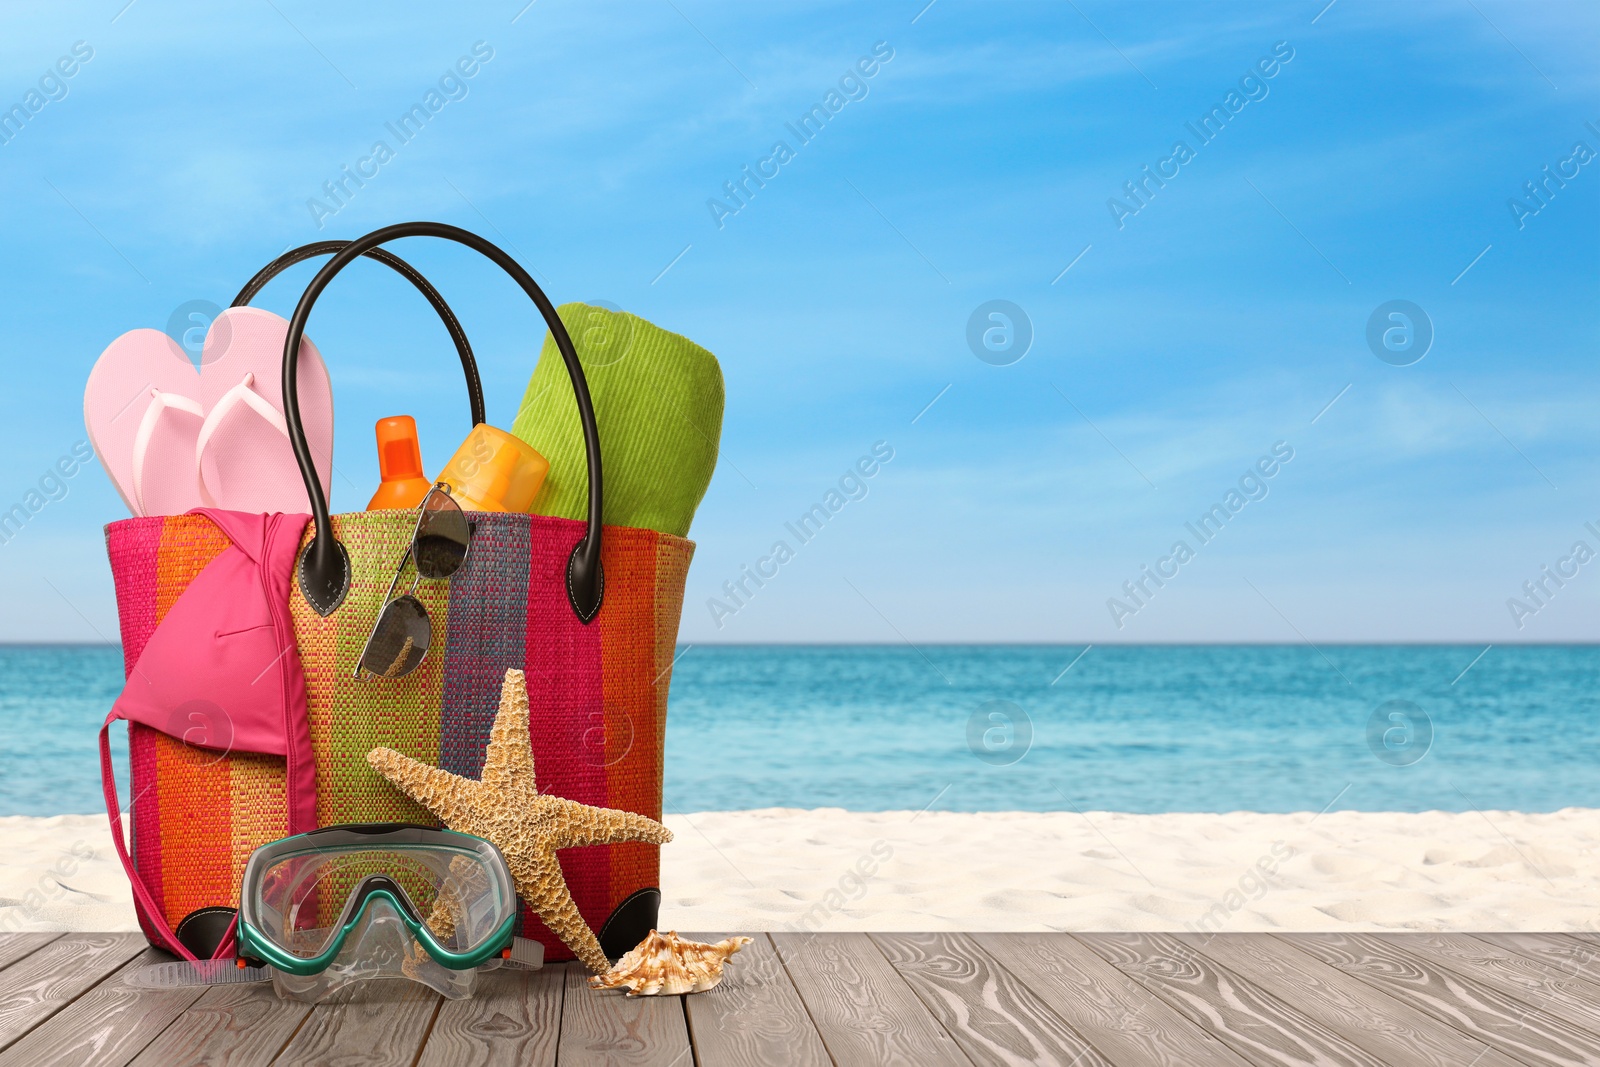 Image of Bag with scuba diving mask and accessories on sunny ocean beach, space for text. Summer vacation